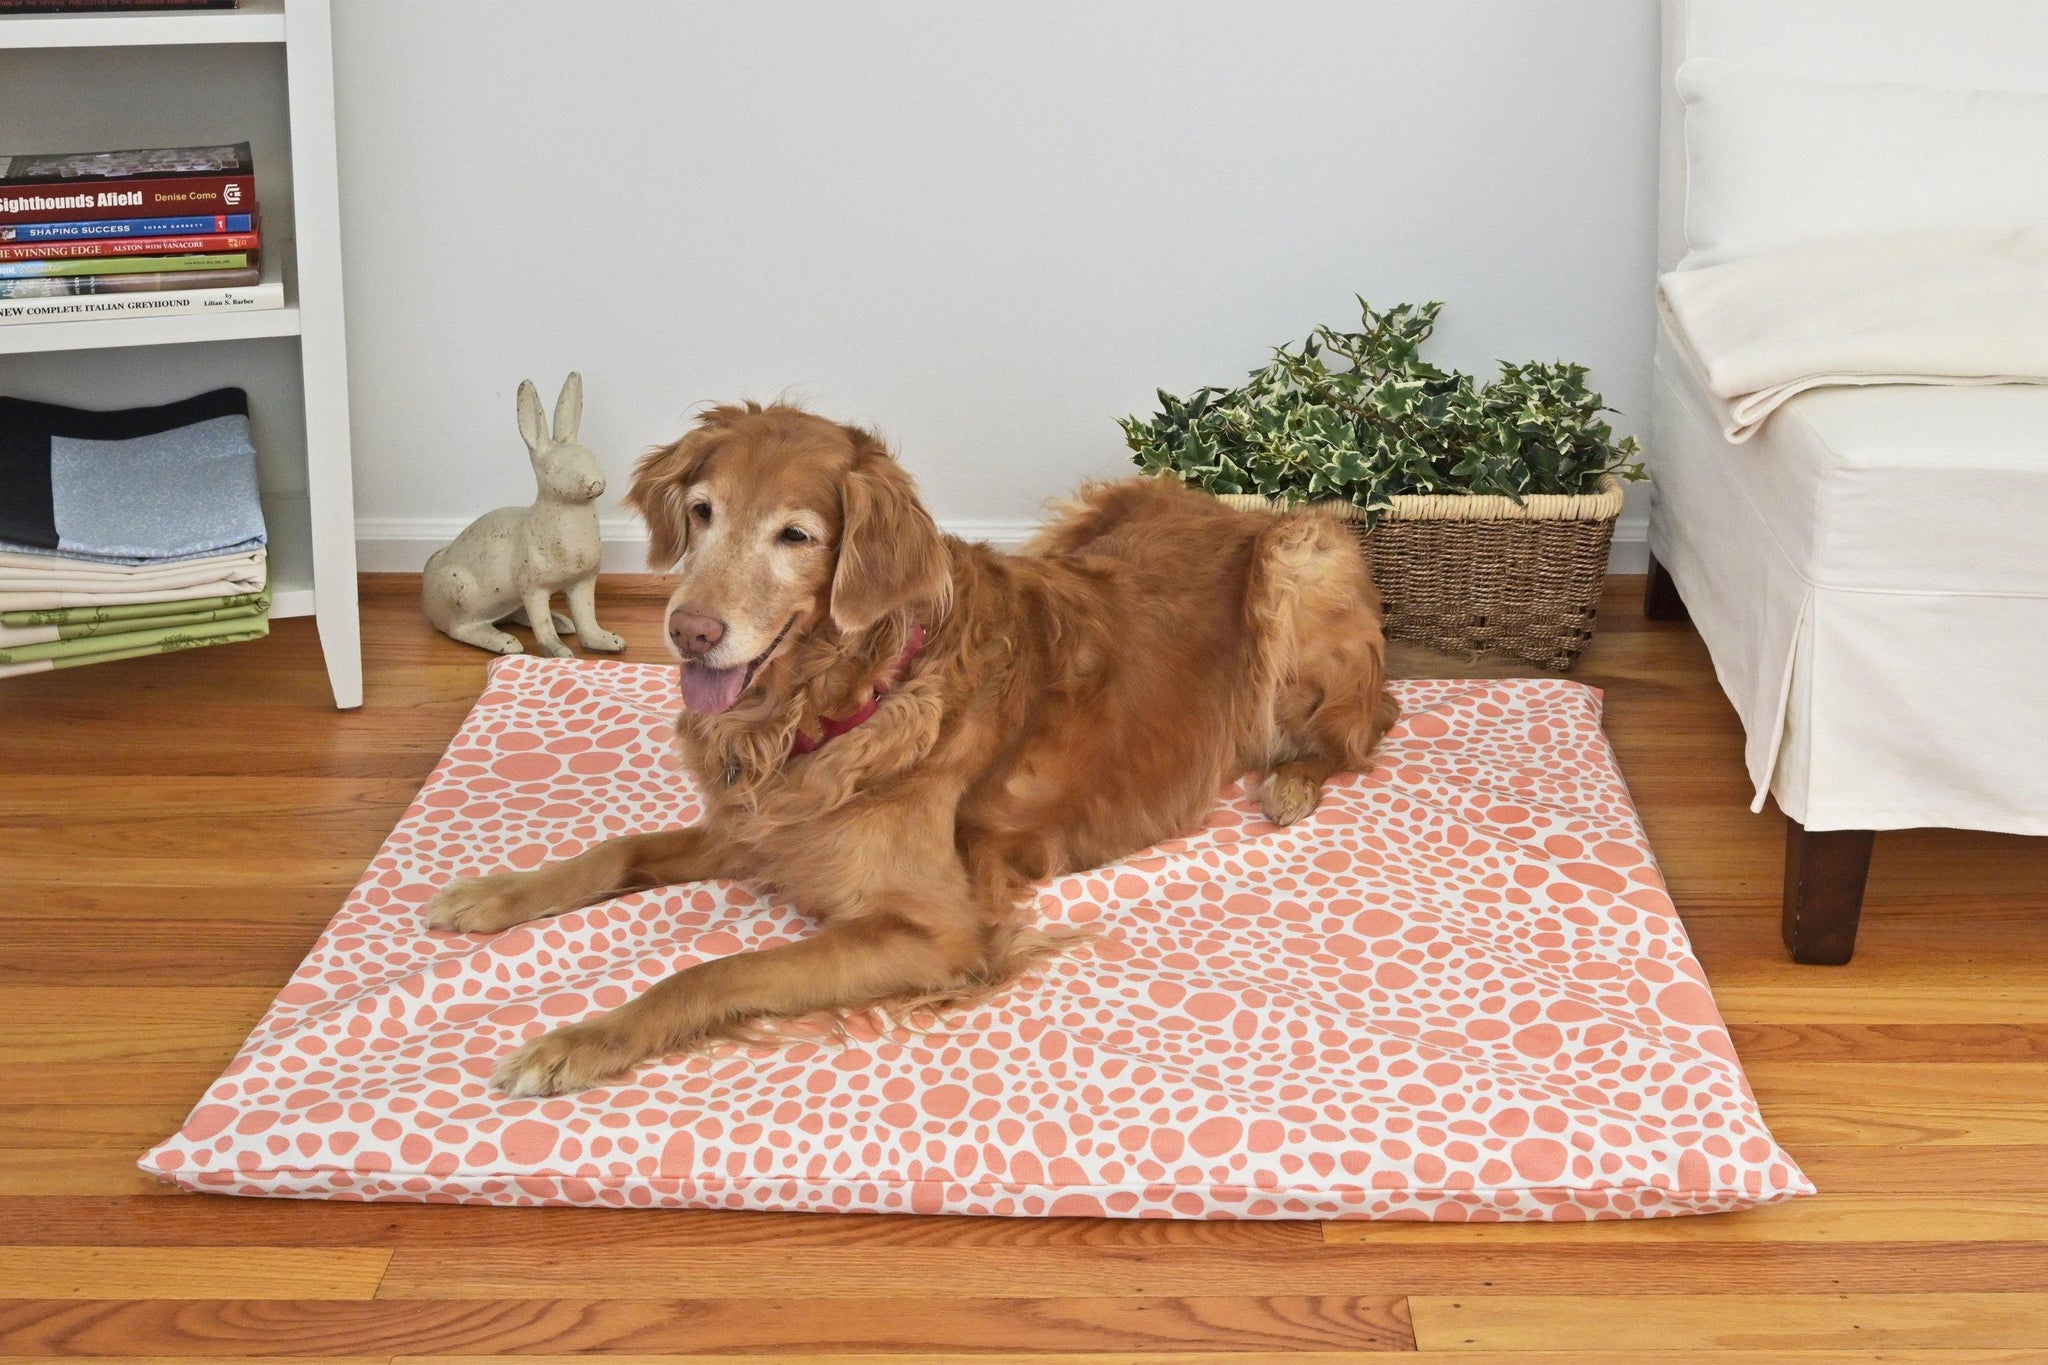 Golden retriever on a coral colored organic dog mat